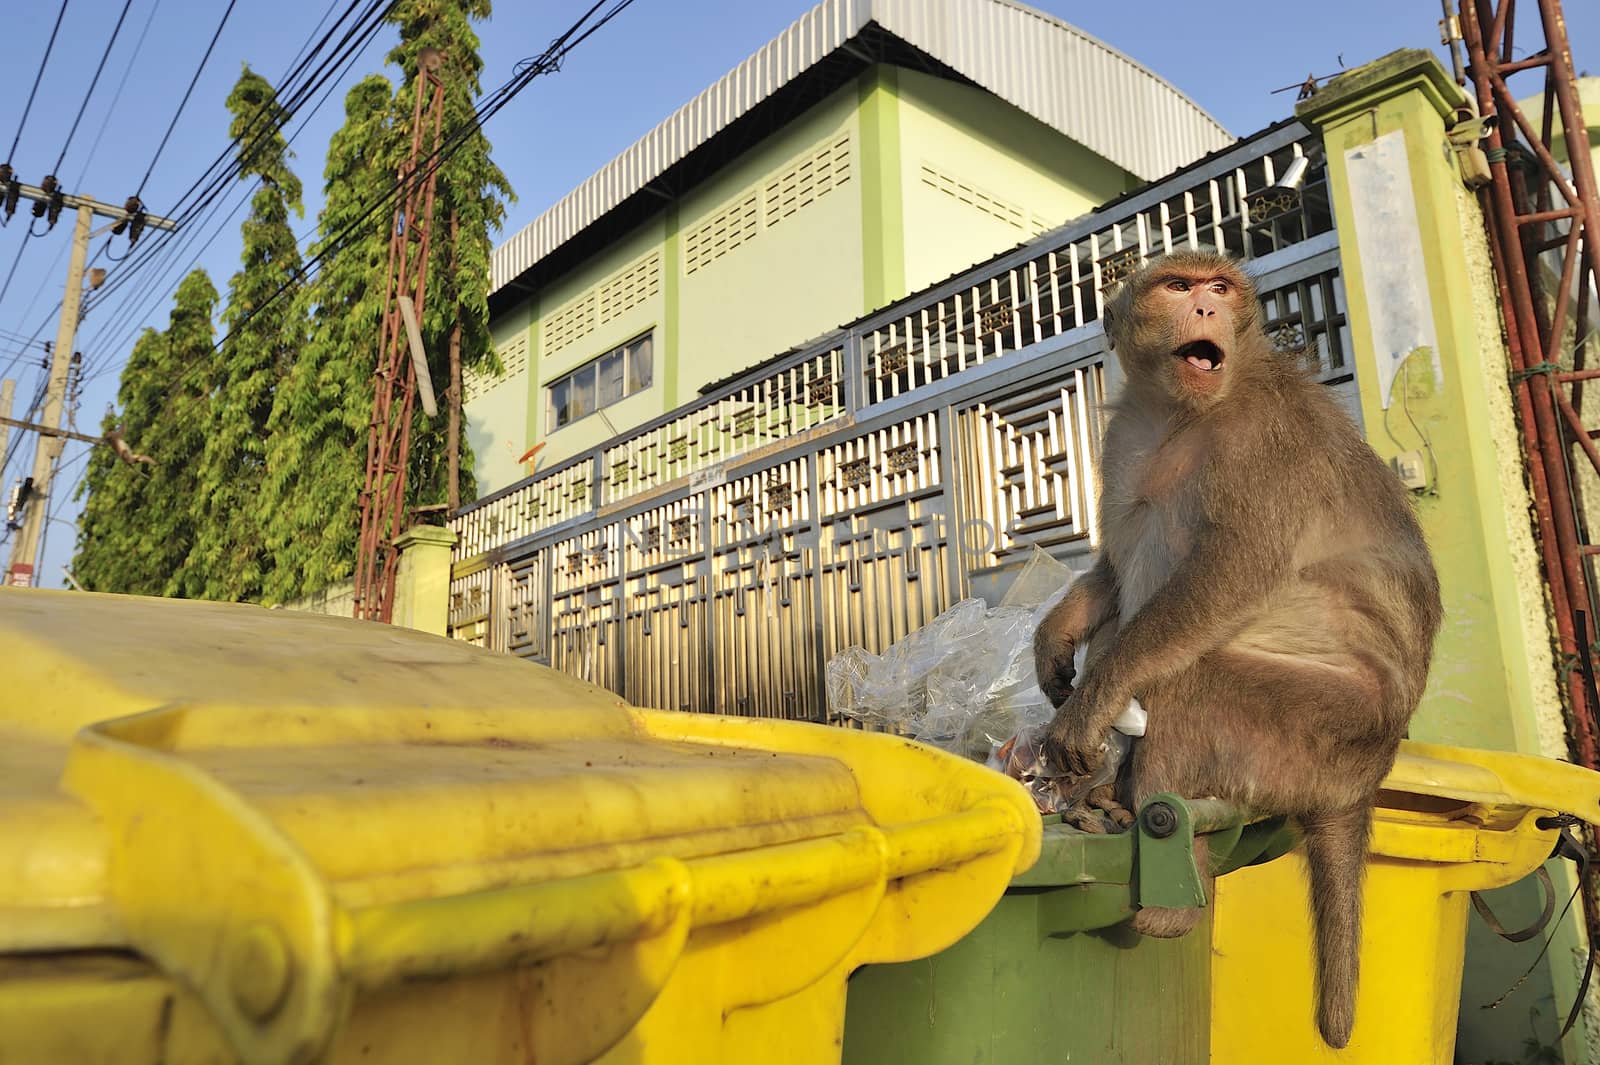 Wild monkey looking for food in a garbage can in Thailand. by think4photop